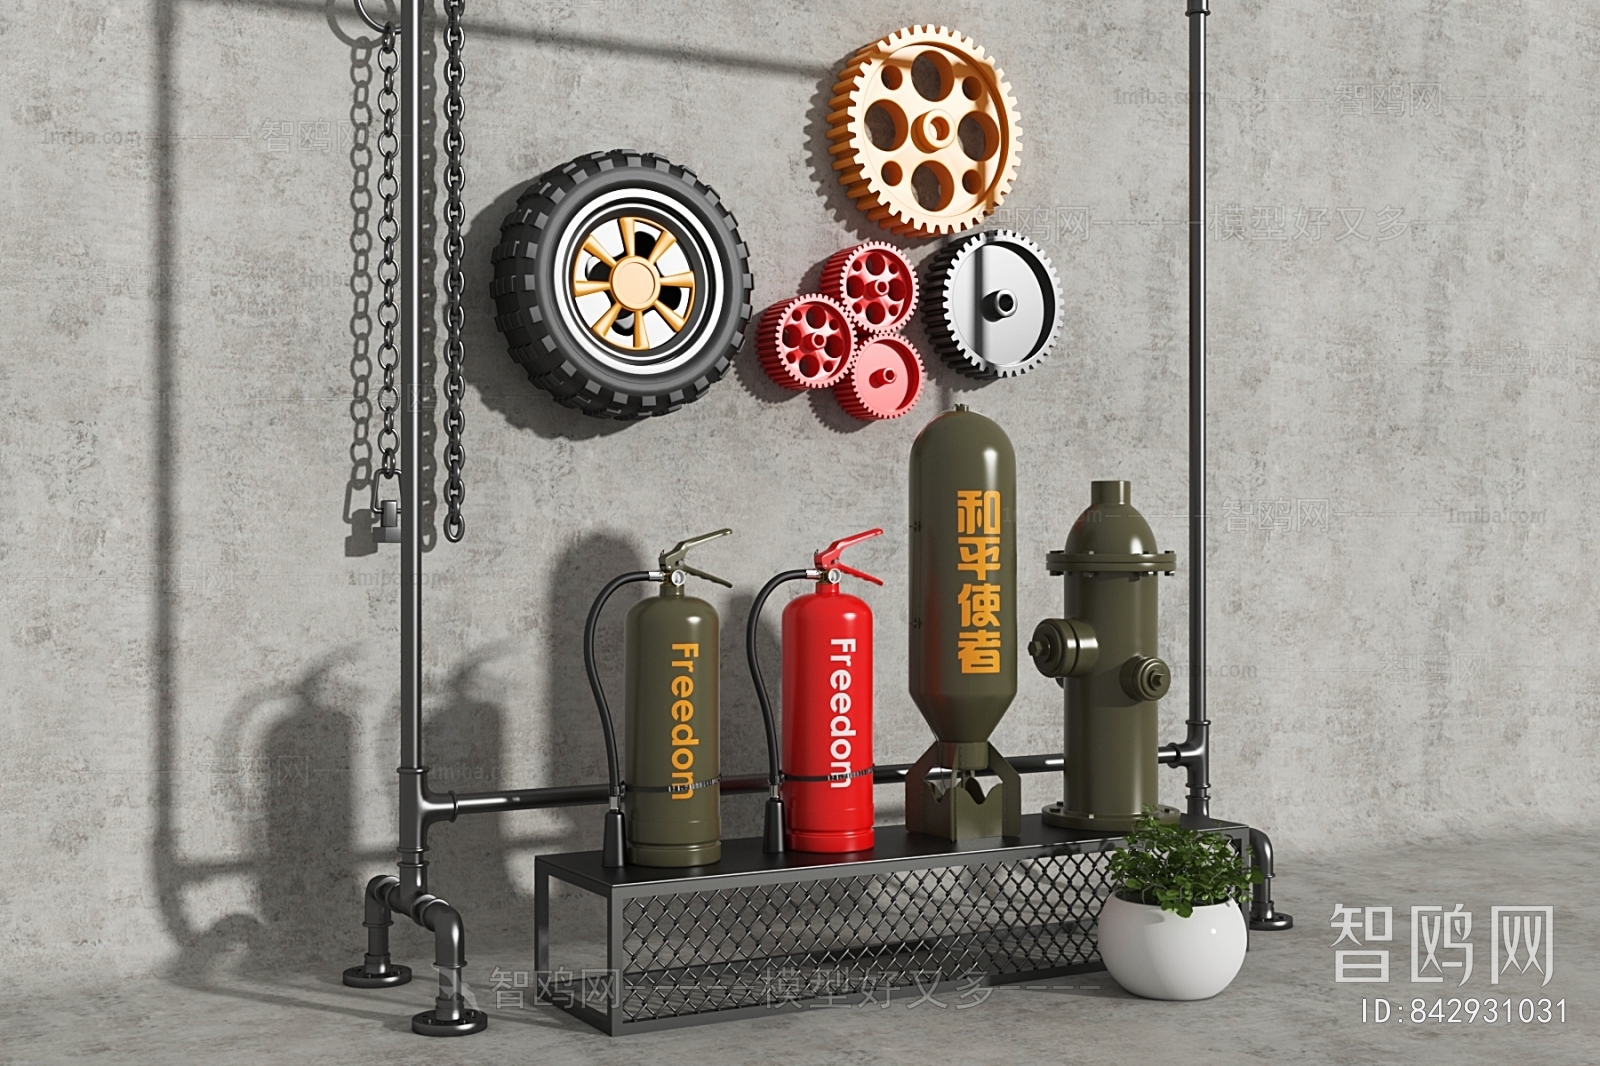 Industrial Style Fire-fighting Equipment